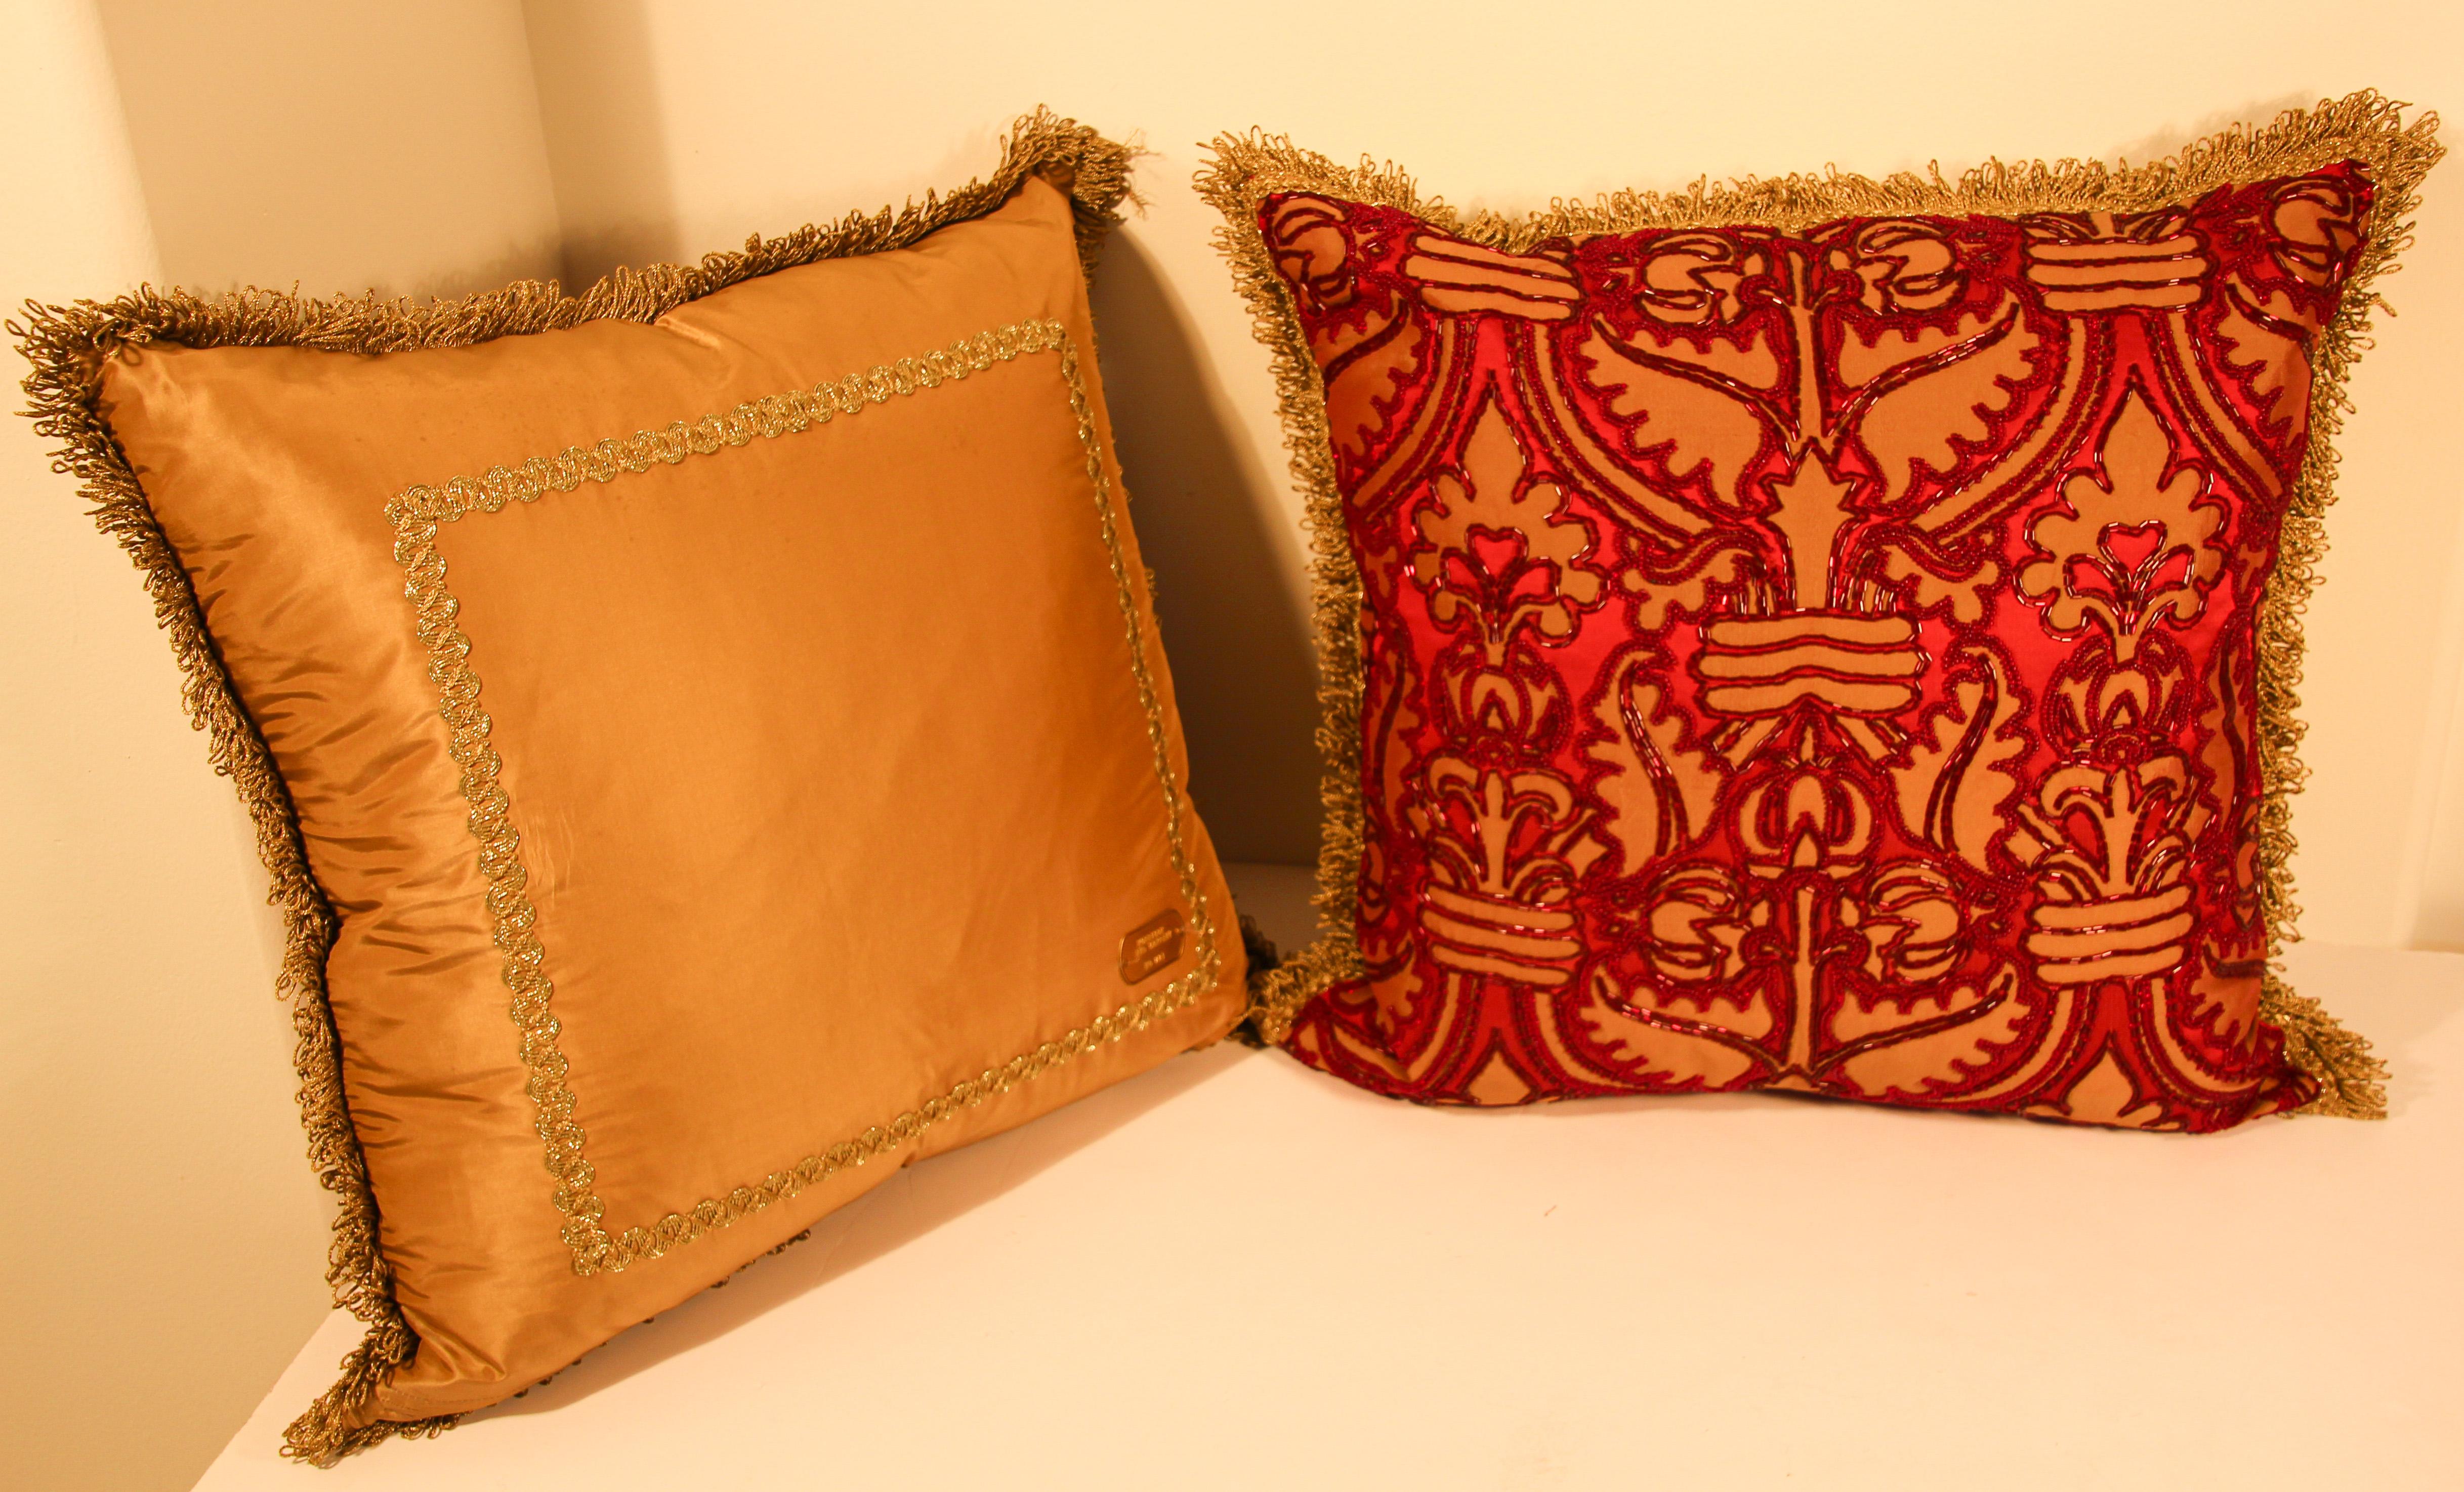 Hollywood Regency Pair of Large Silk Pillows with Metallic Threads and Red Beads